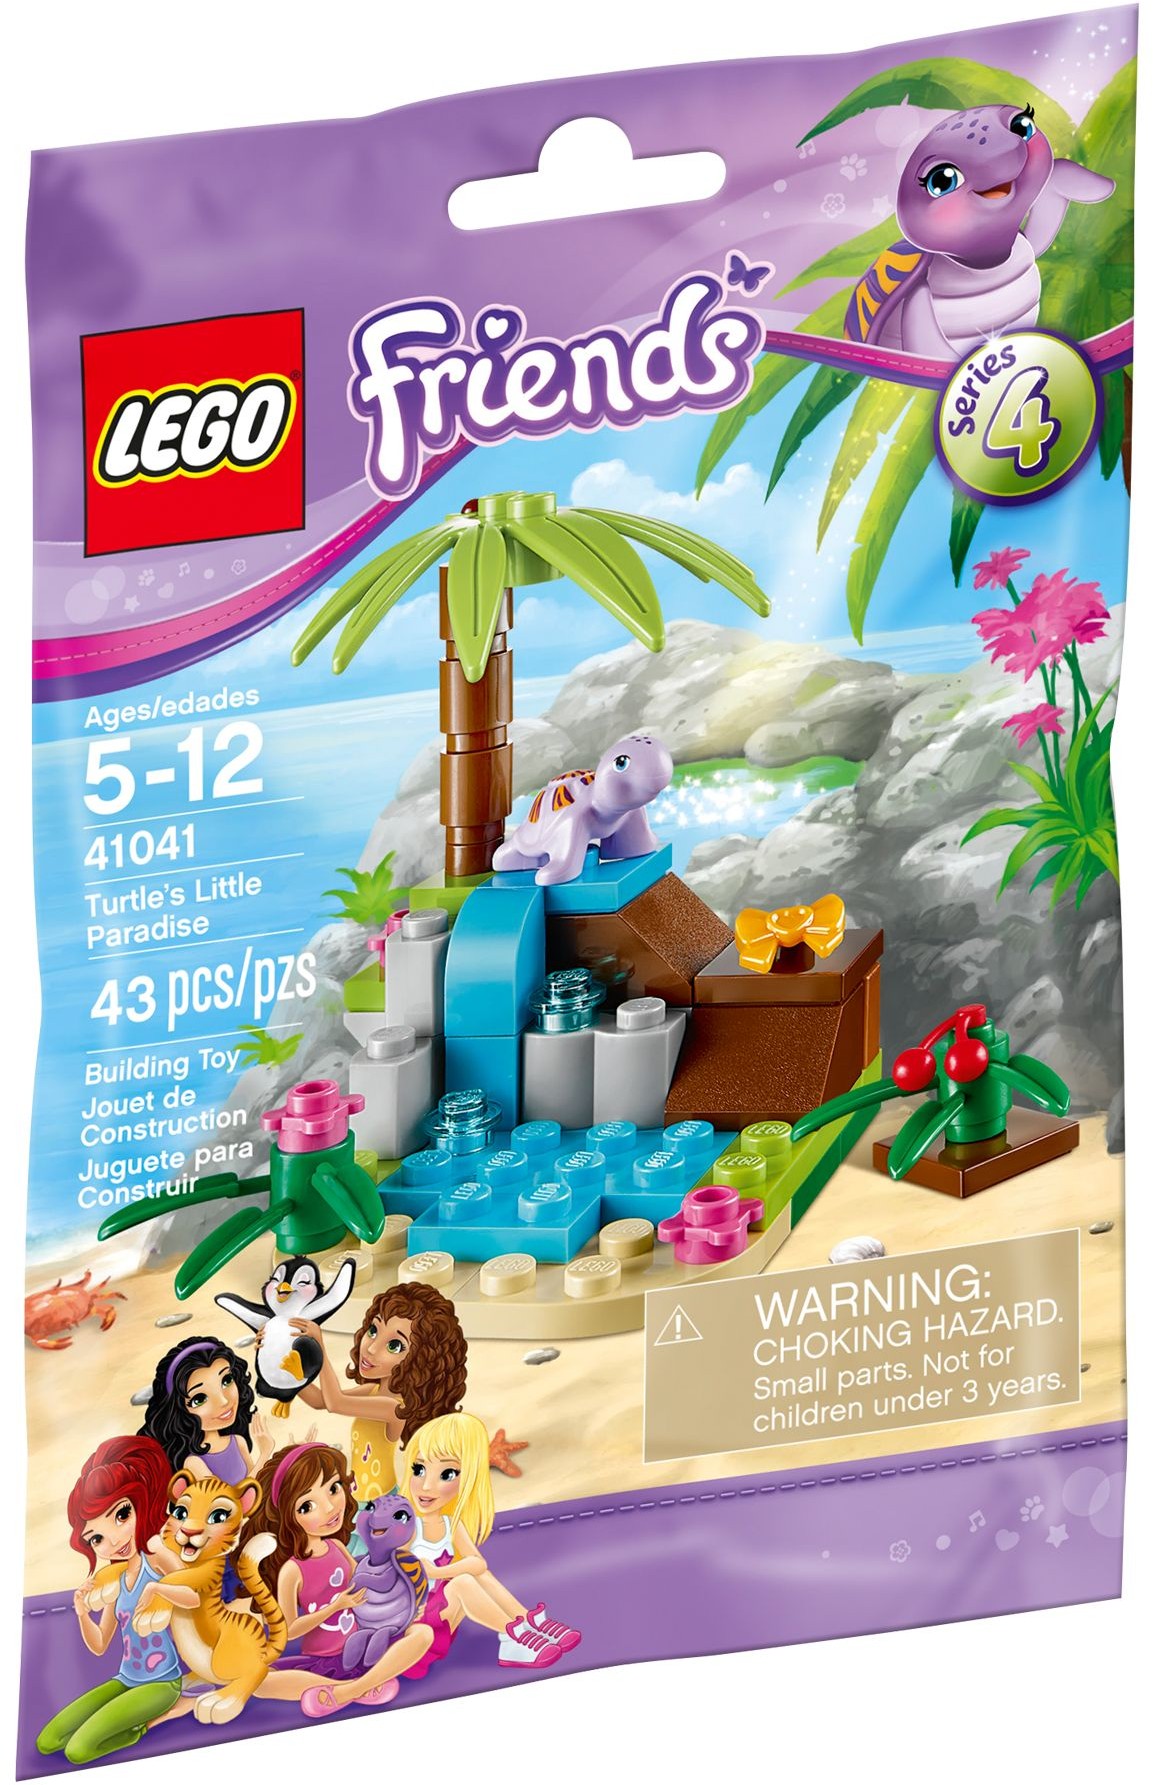 Brand new/sealed Lego Friends 41041 Series 4 Turtle’s Little Paradise 